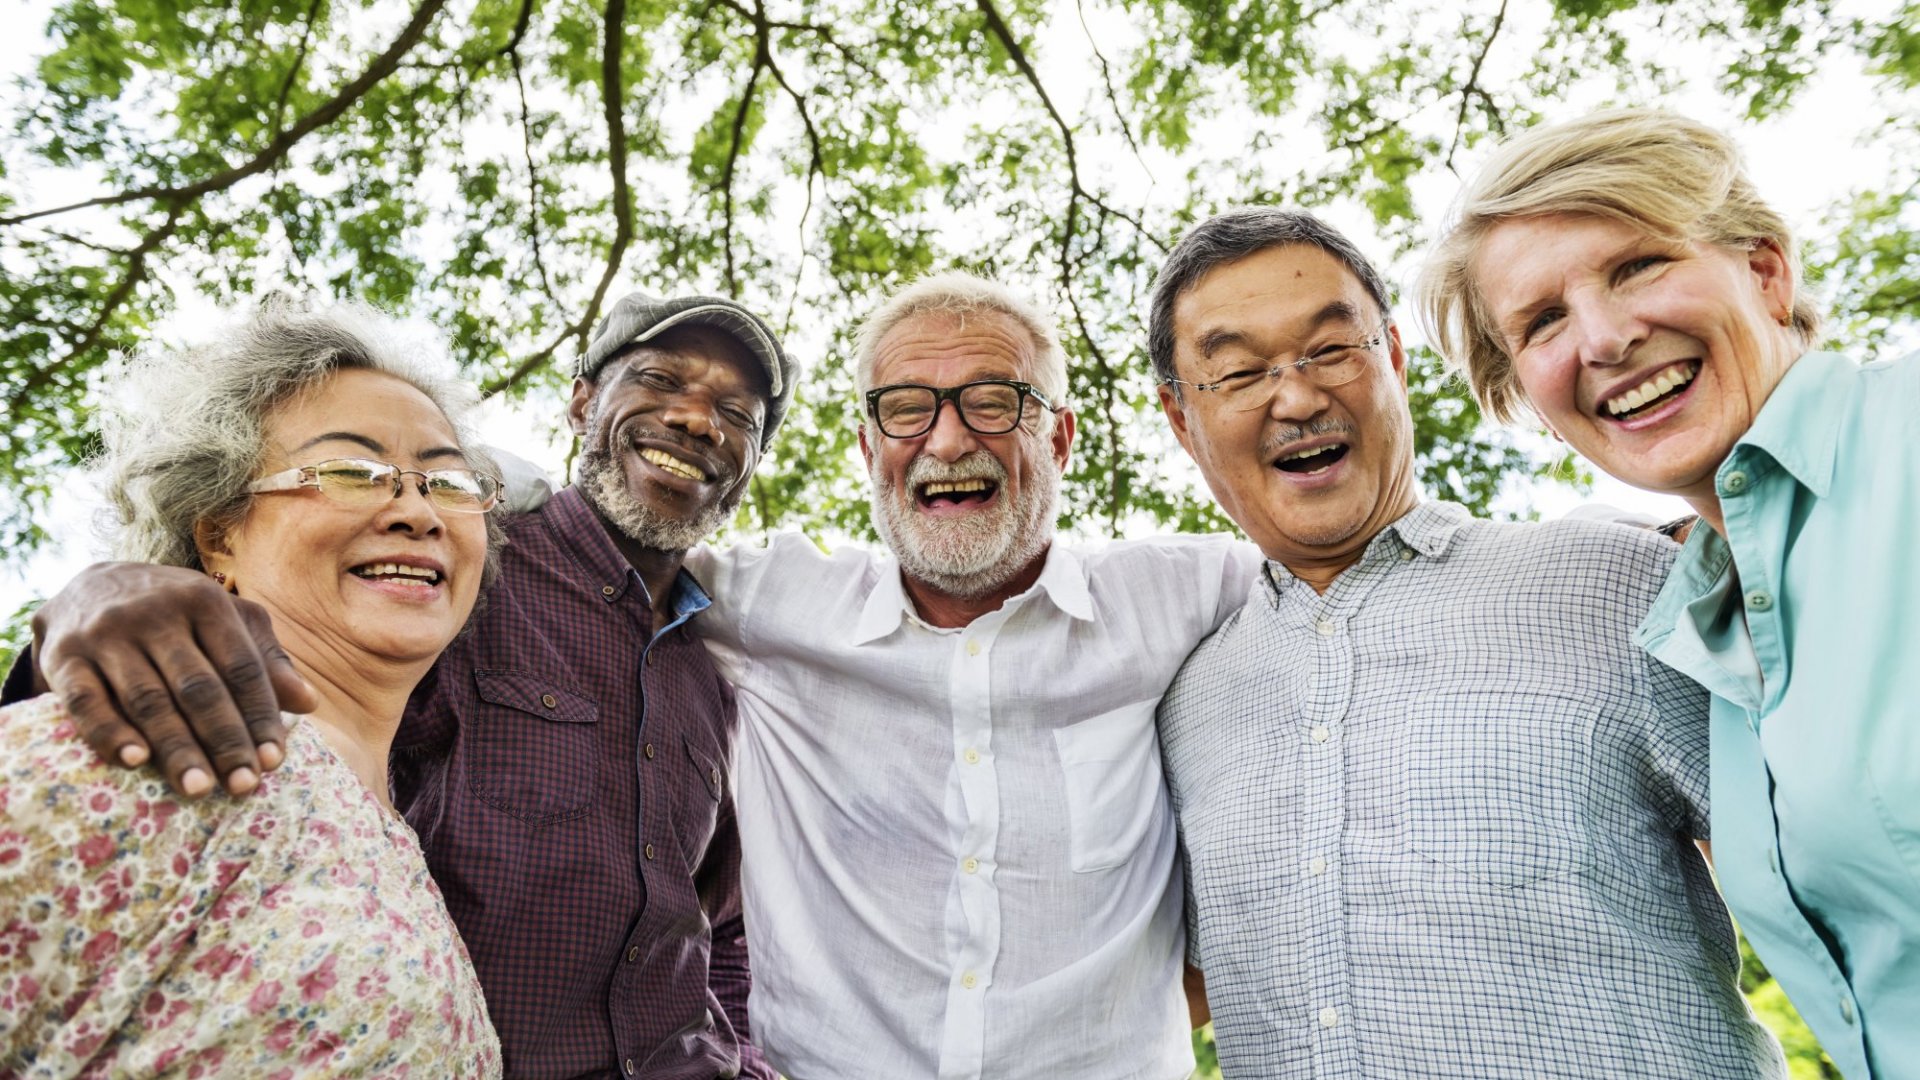 A group of boomers are smiling together in a park.